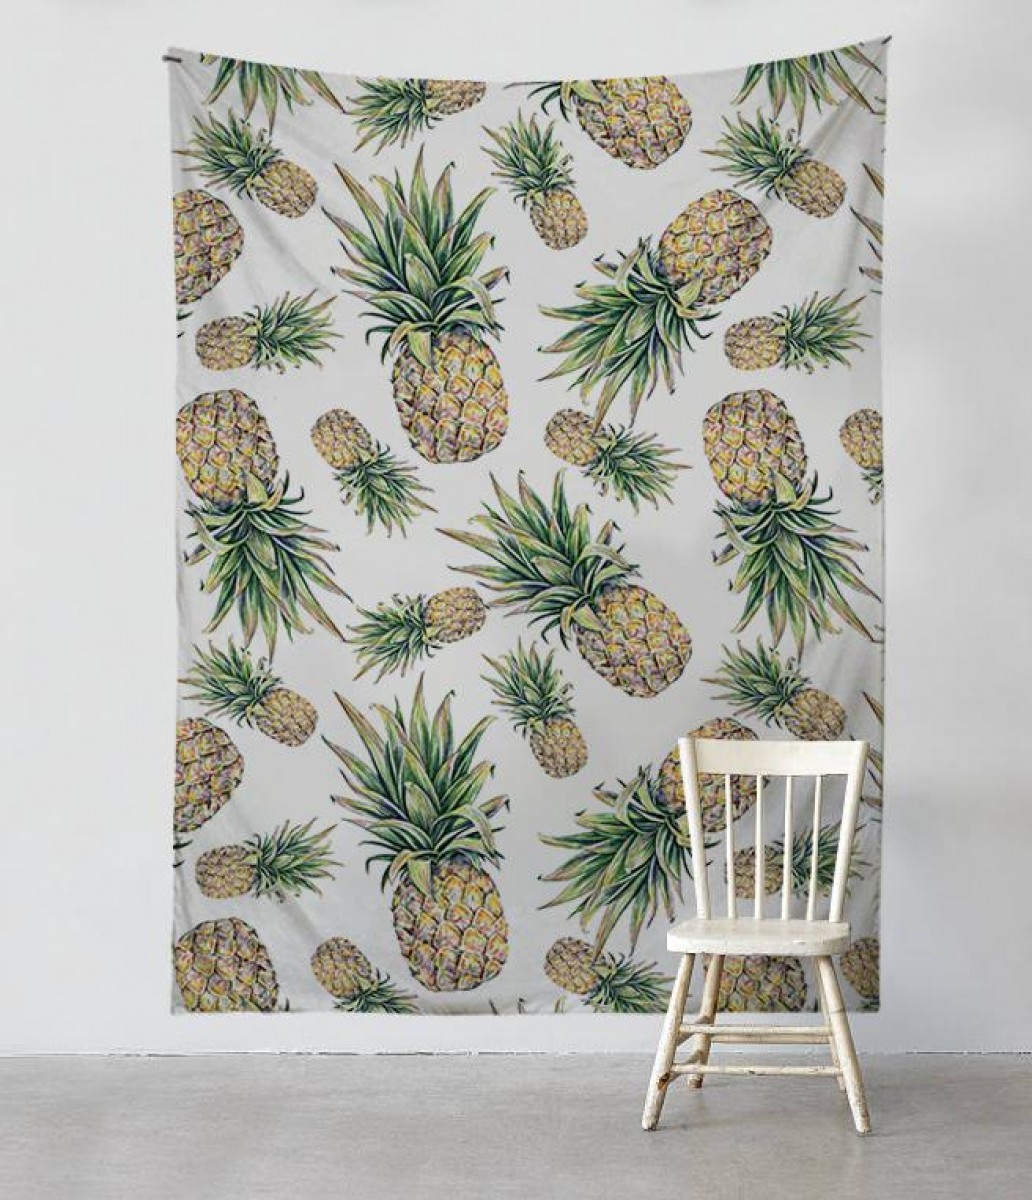 Tropical pineapple - Tapestries - PinkPalmDecor.com